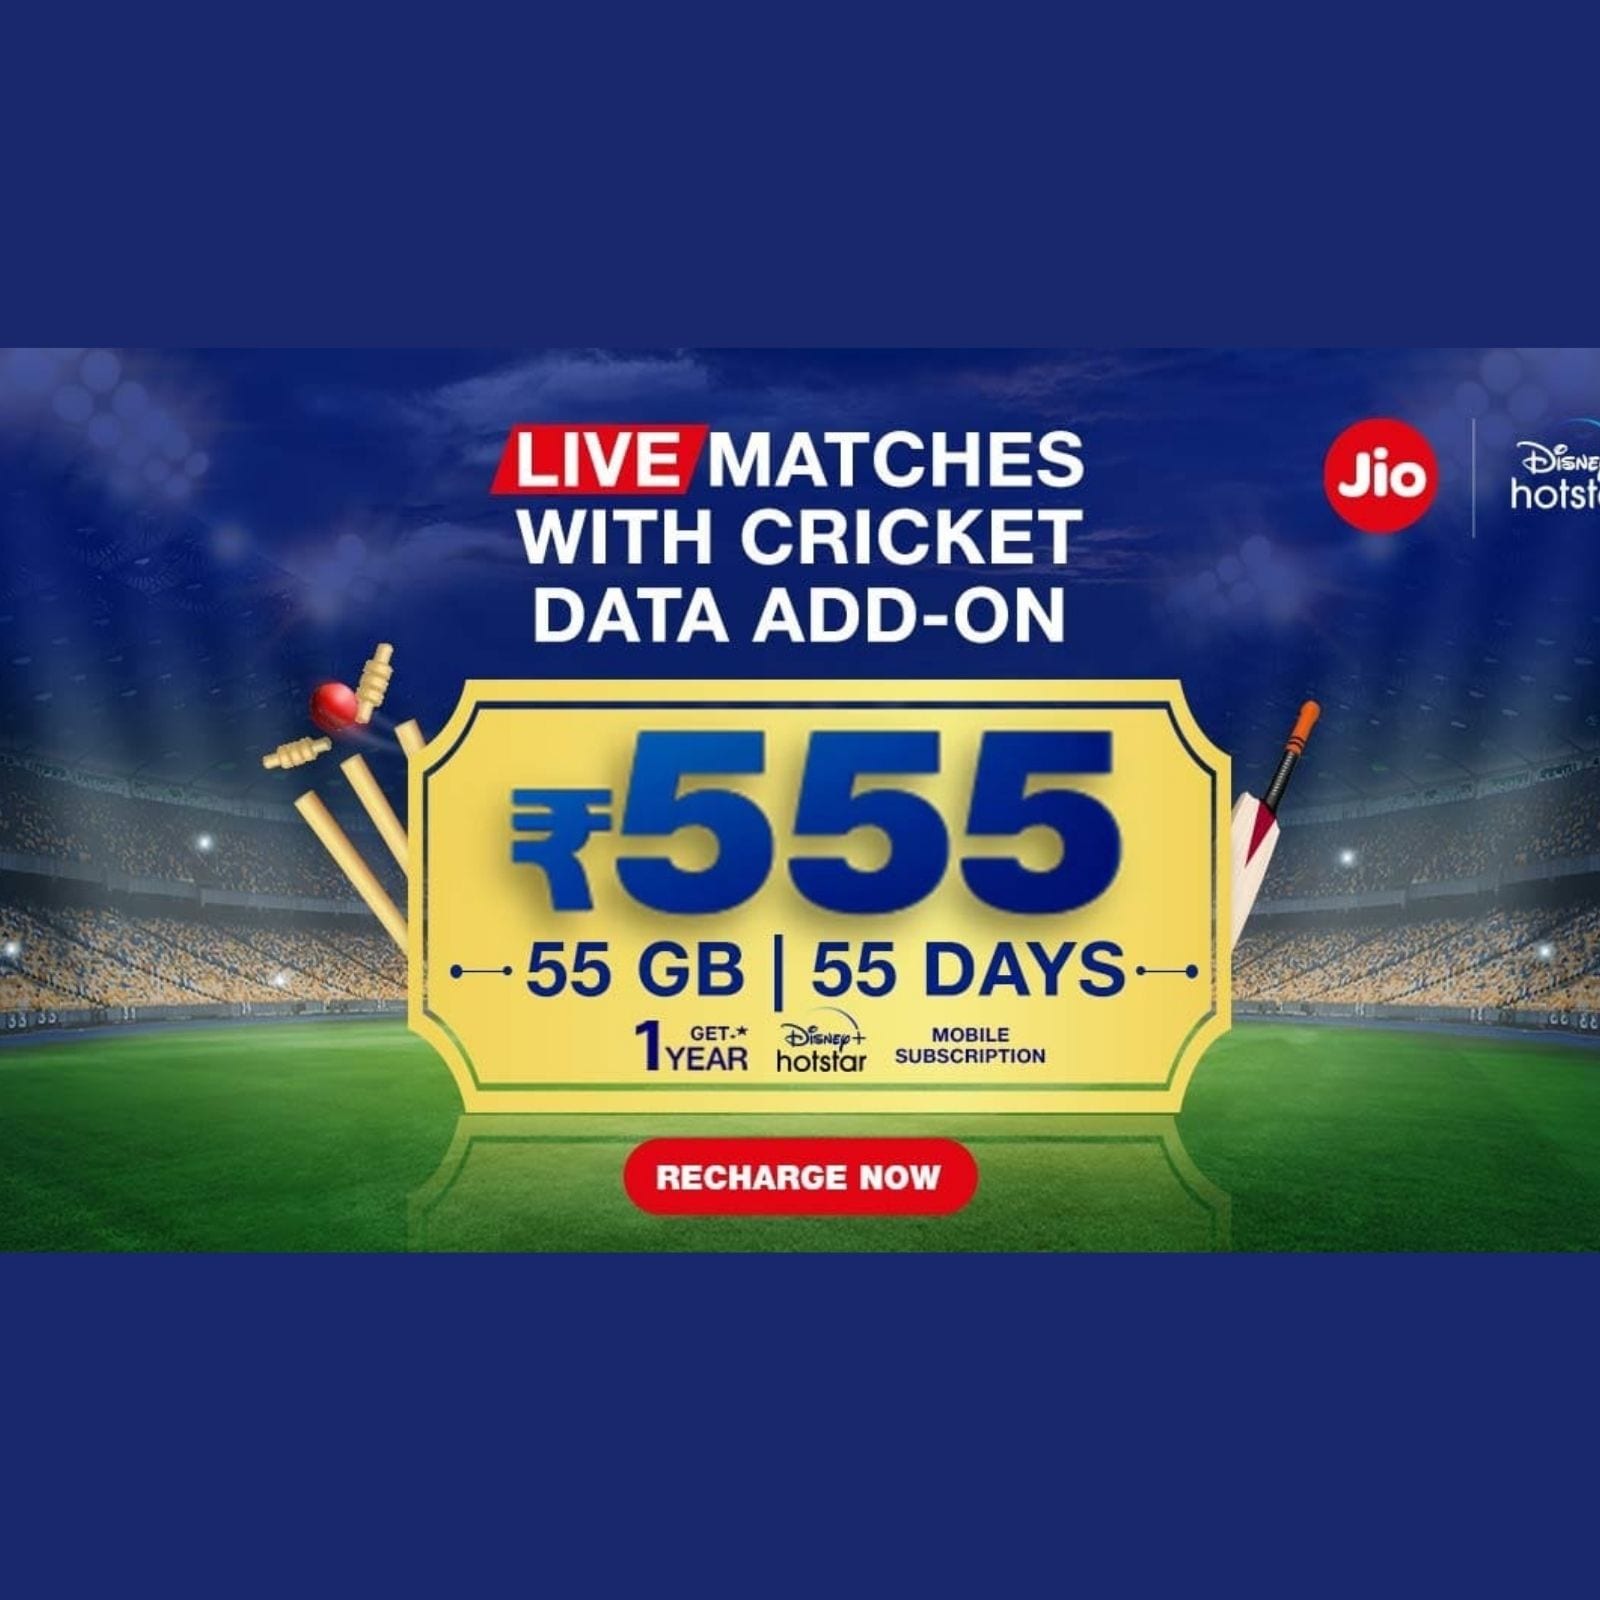 IPL 2022 Reliance Jio Offering Free Disney+ Hotstar Subscription For Cricket Lovers With These Plans